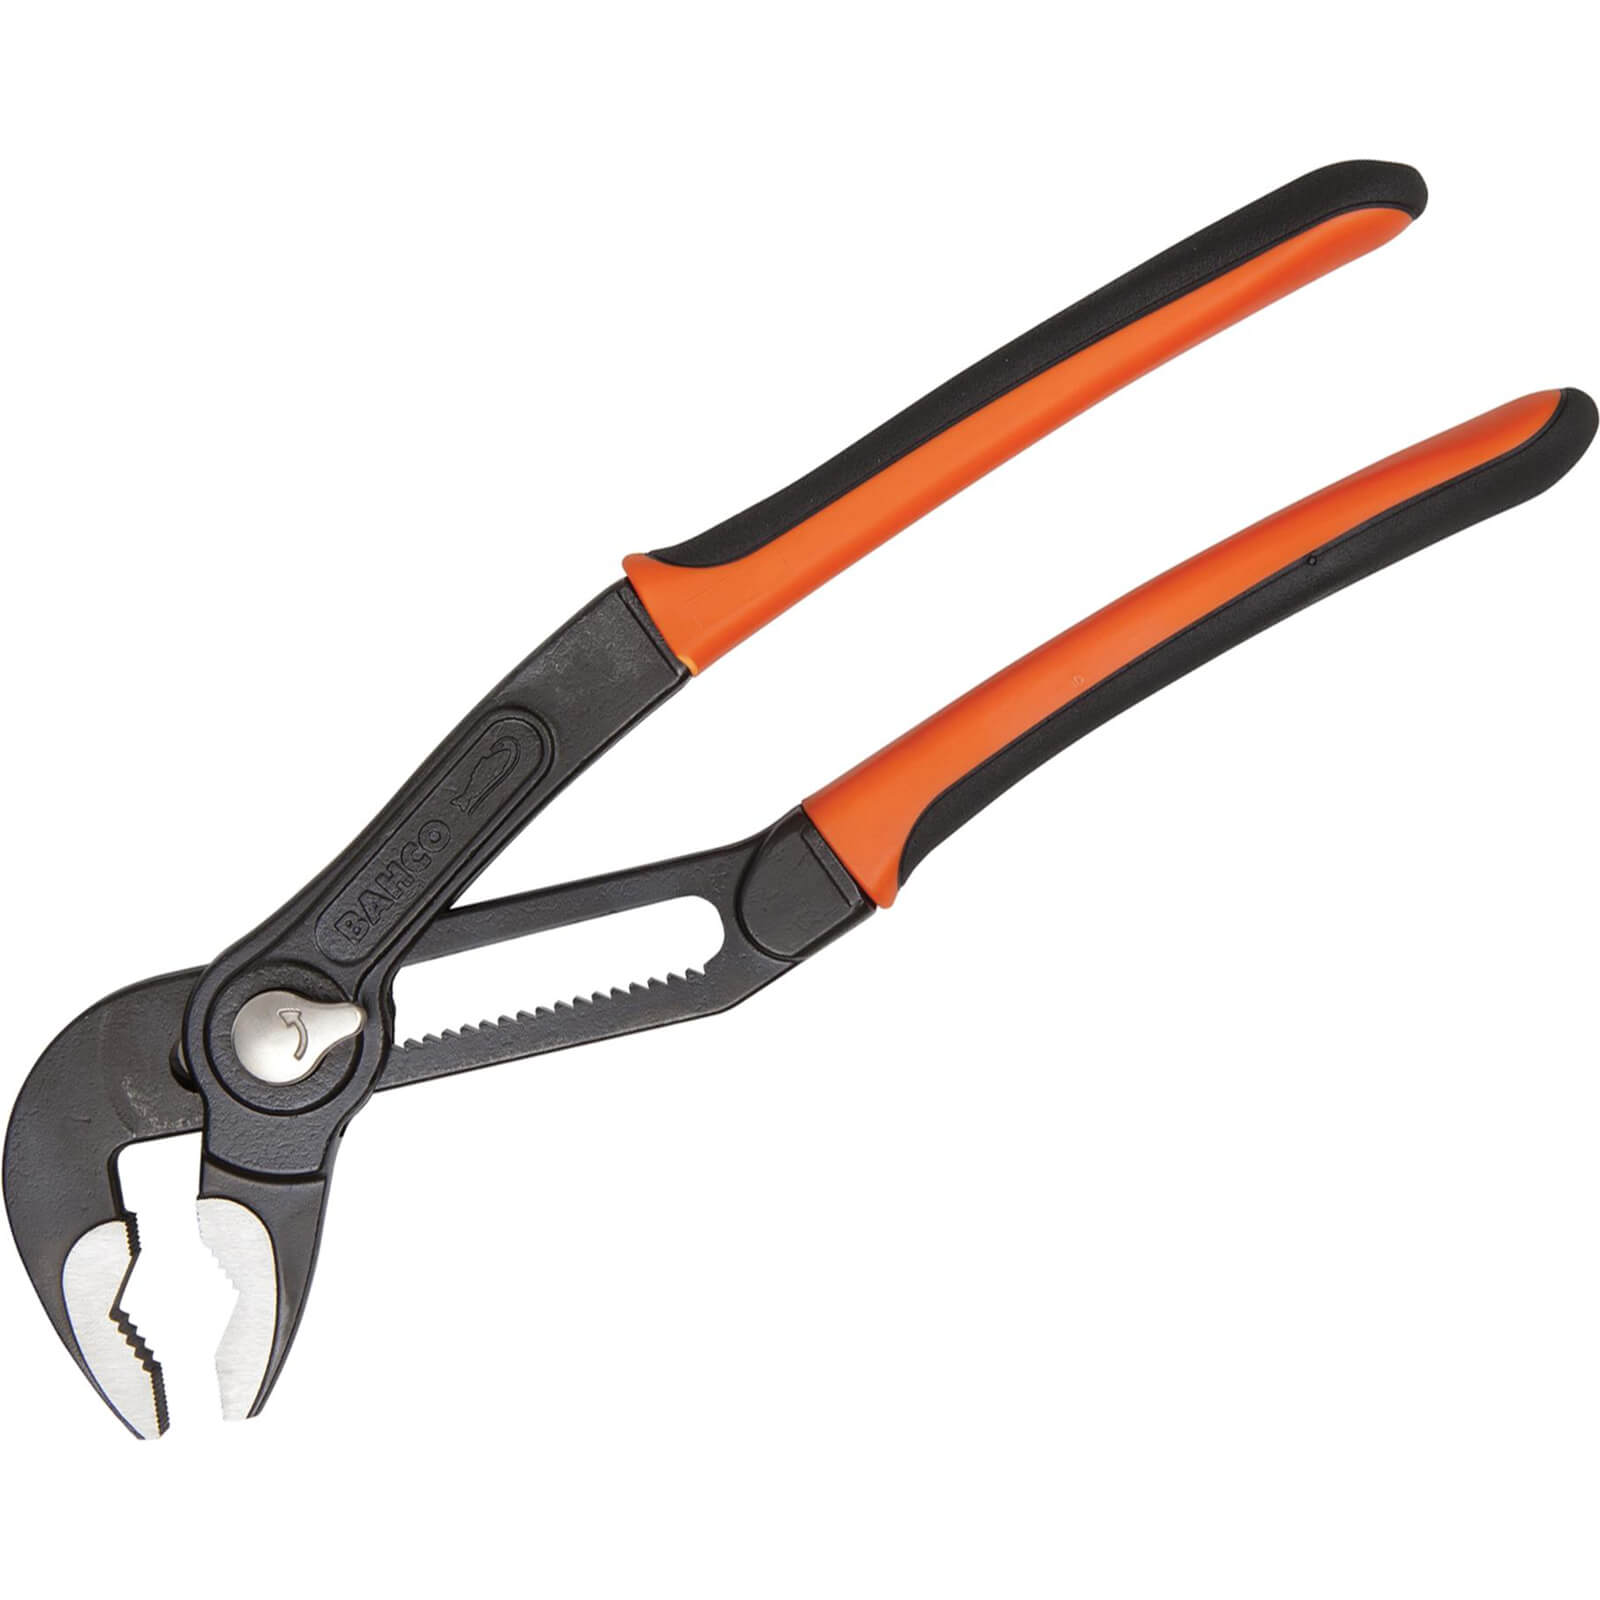 Photo of Bahco 7223 Quick Adjust Slip Joint Pliers 200mm